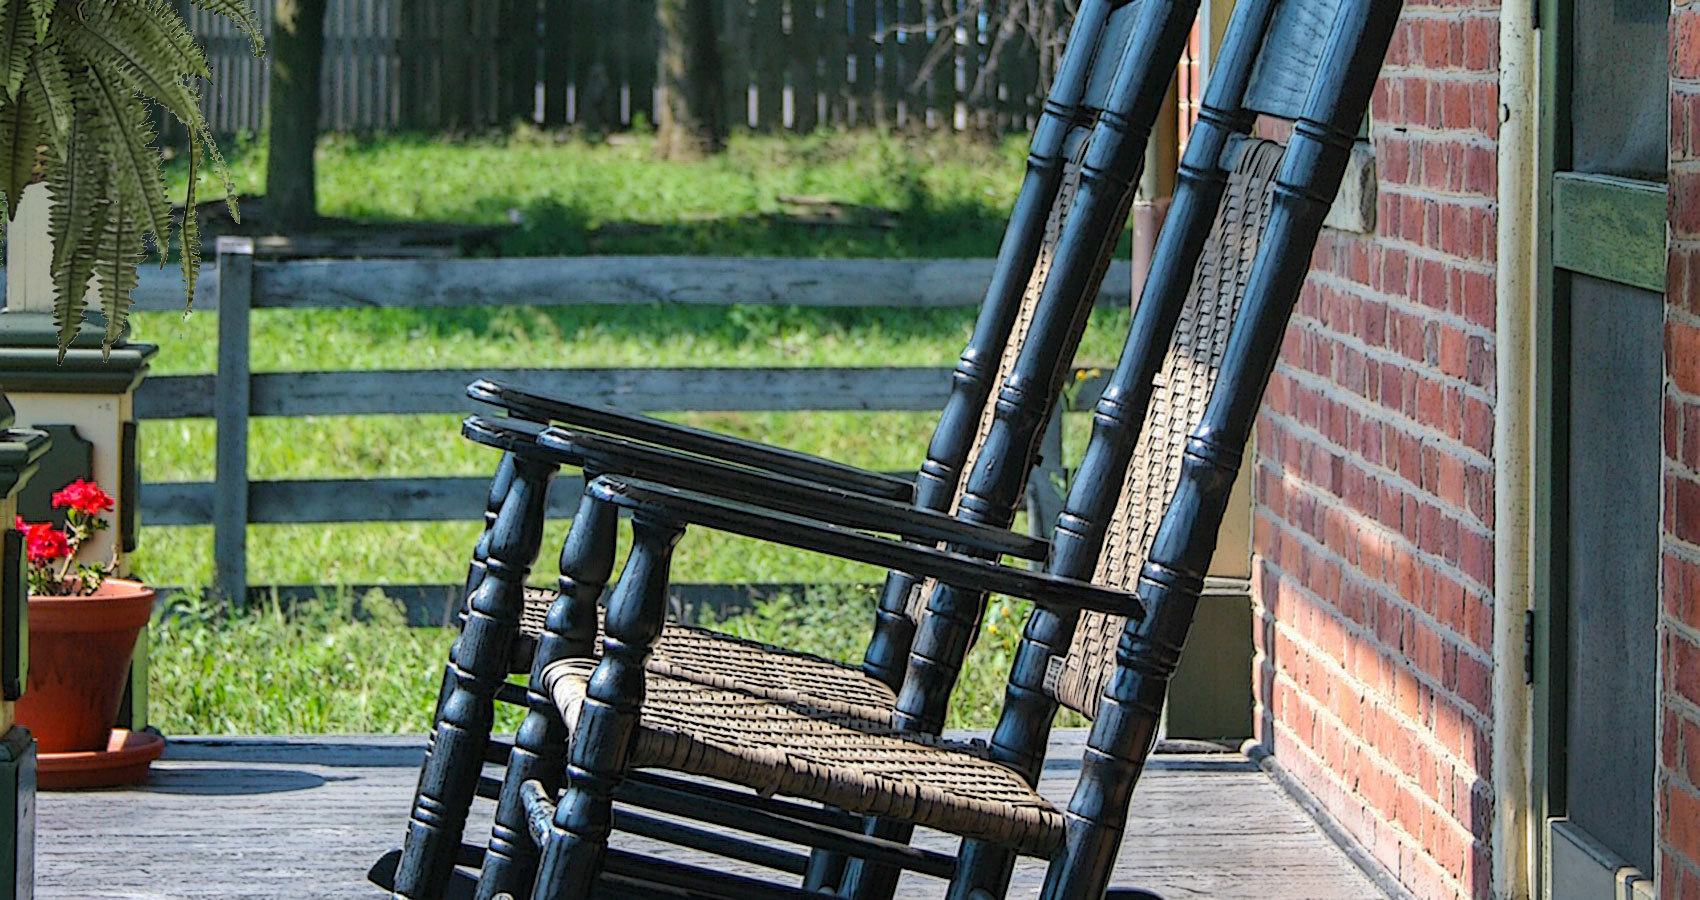 Rocking Chairs written by Vickie Mryczko at Spillwords.com